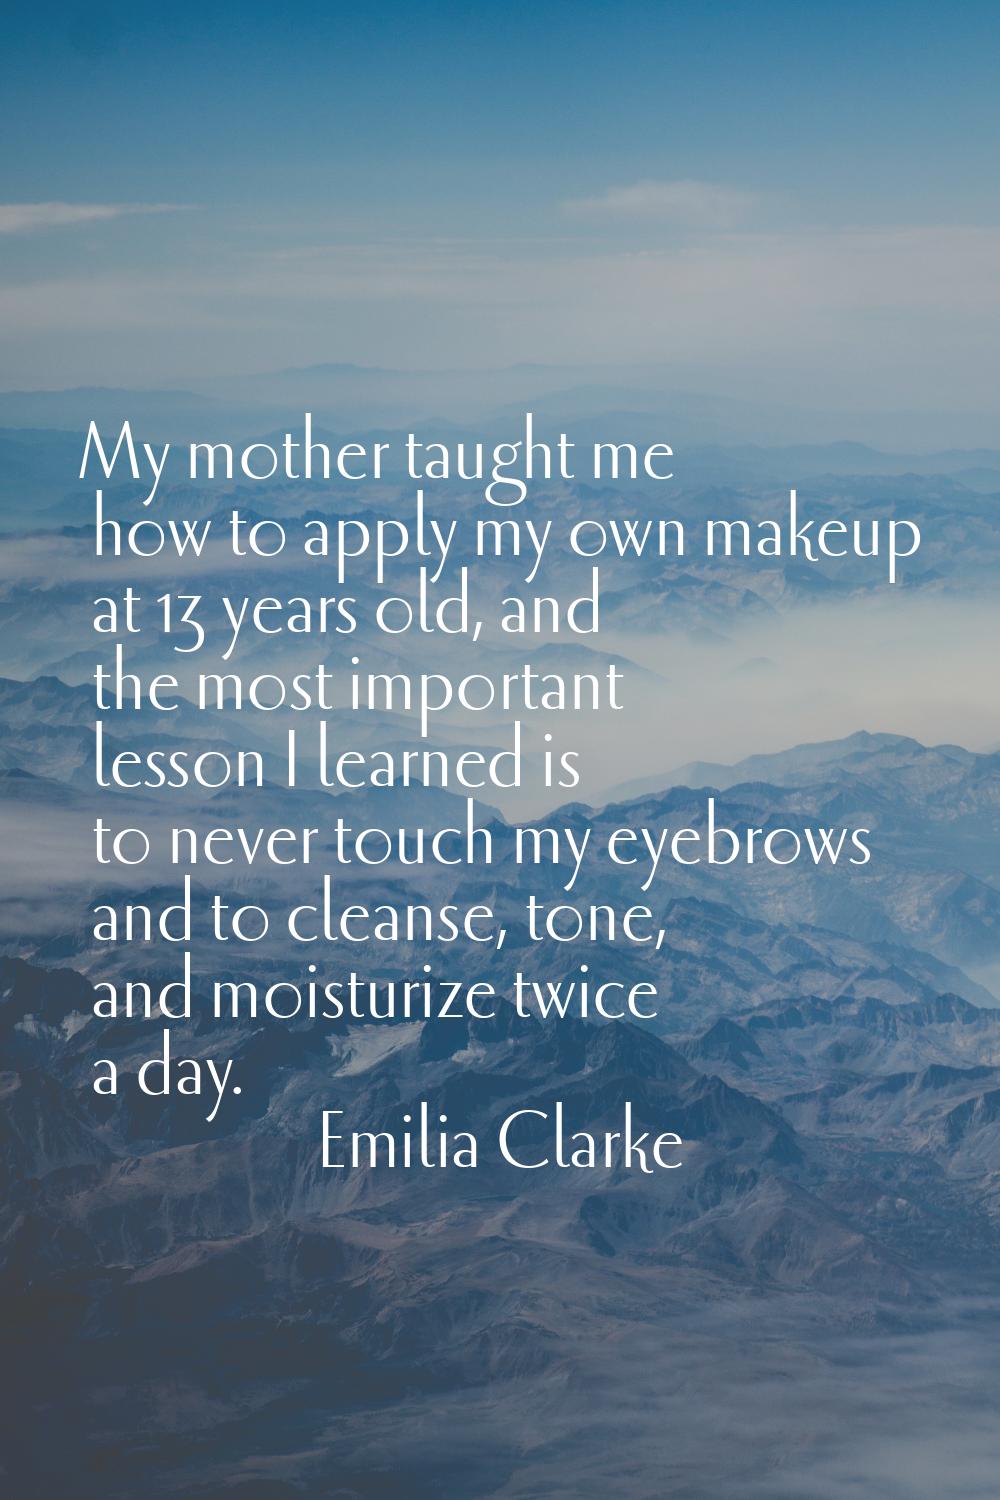 My mother taught me how to apply my own makeup at 13 years old, and the most important lesson I lea